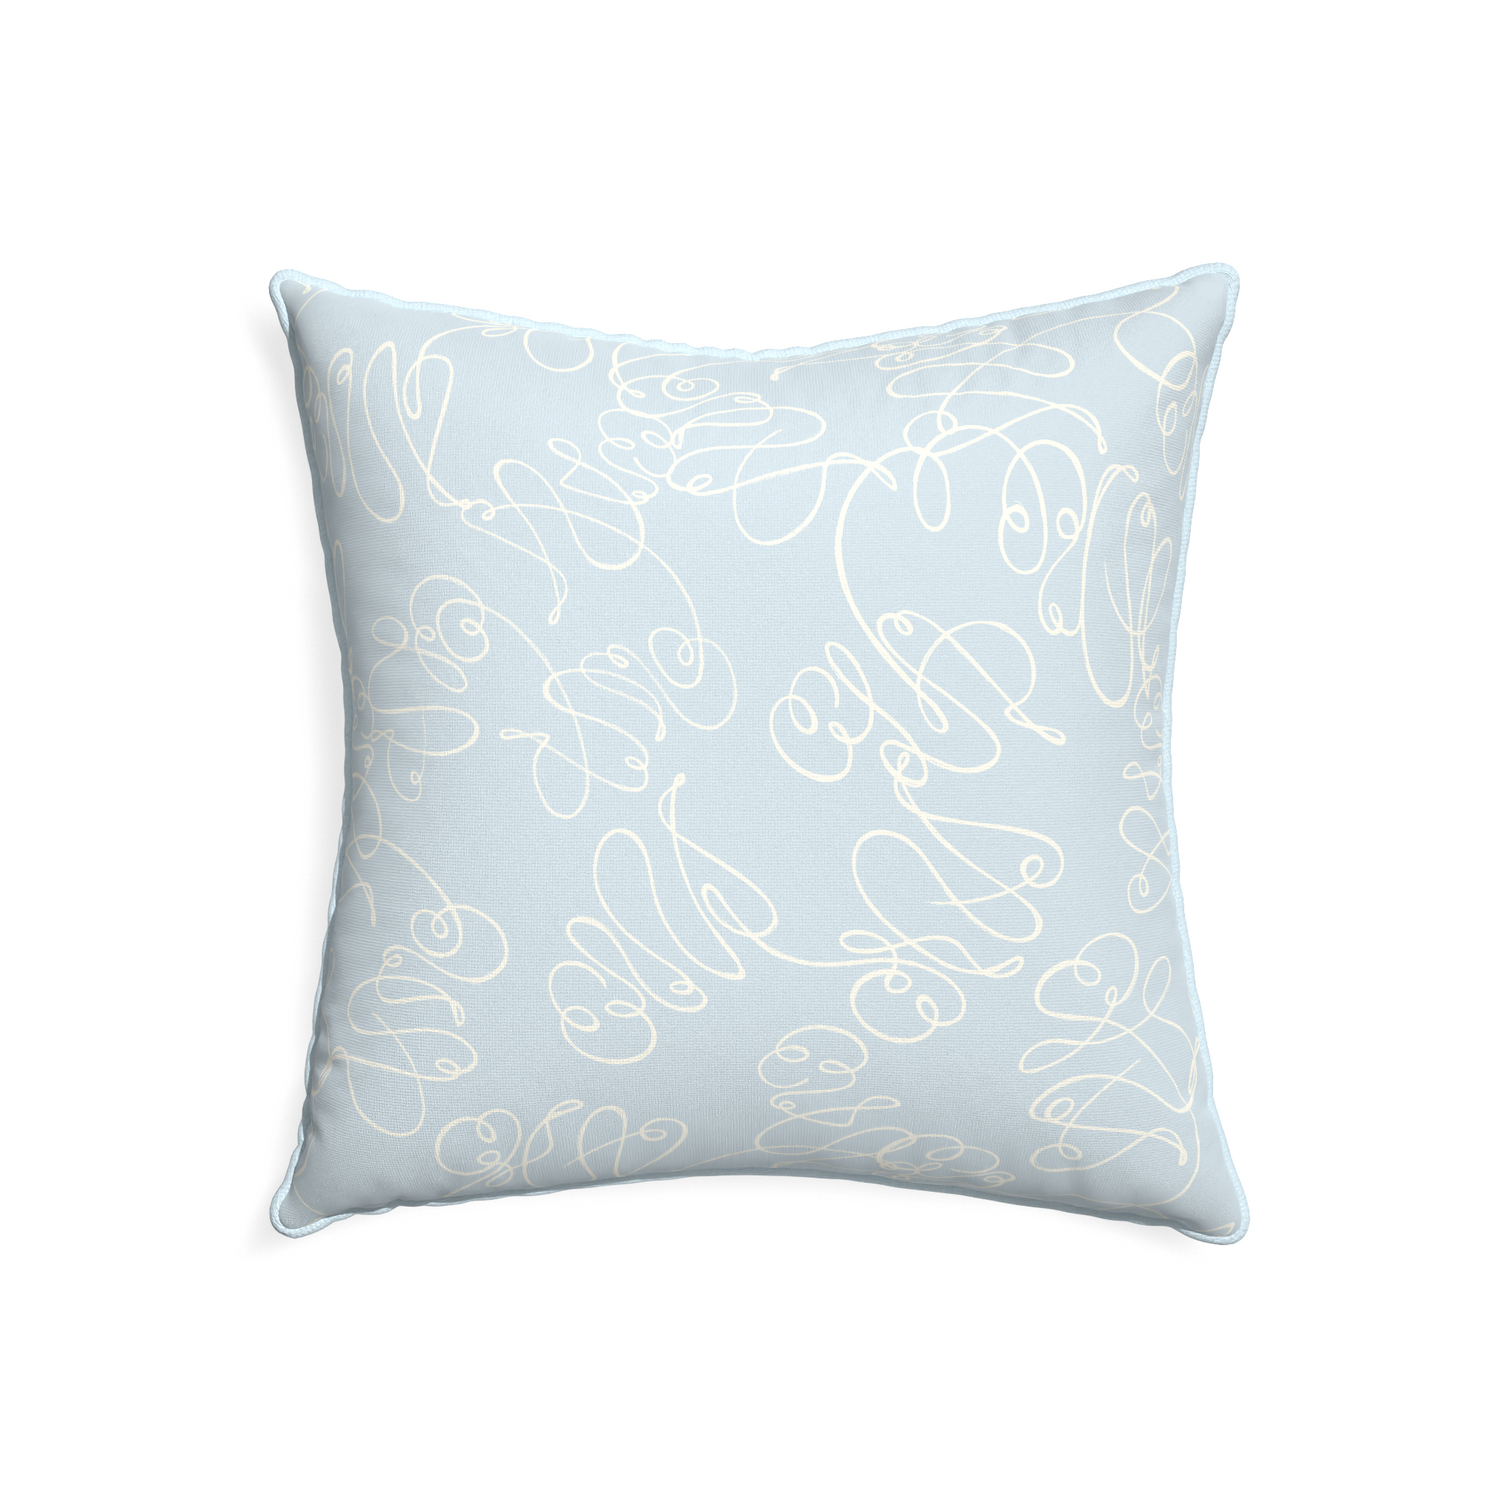 22-square mirabella custom powder blue abstractpillow with powder piping on white background